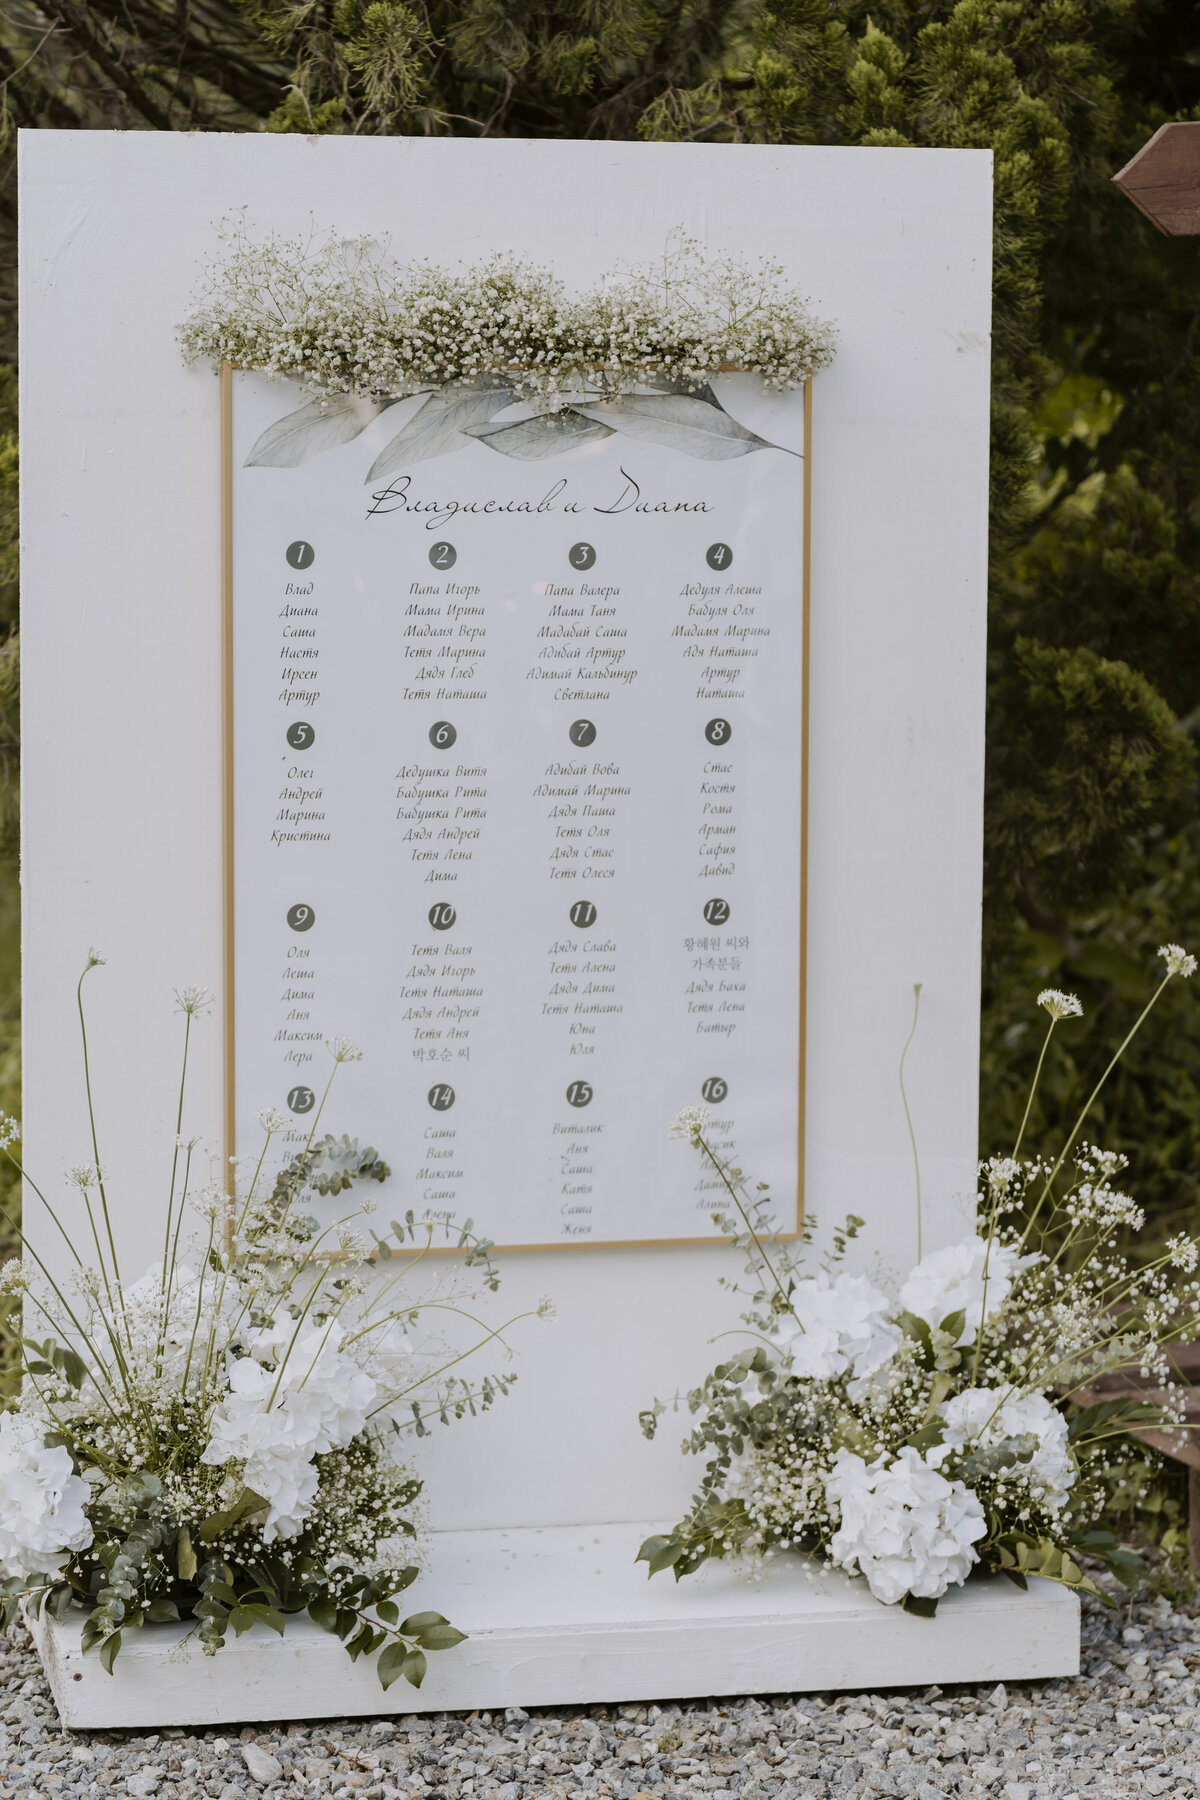 the guests list and what table will they sit decorated with fresh flowers